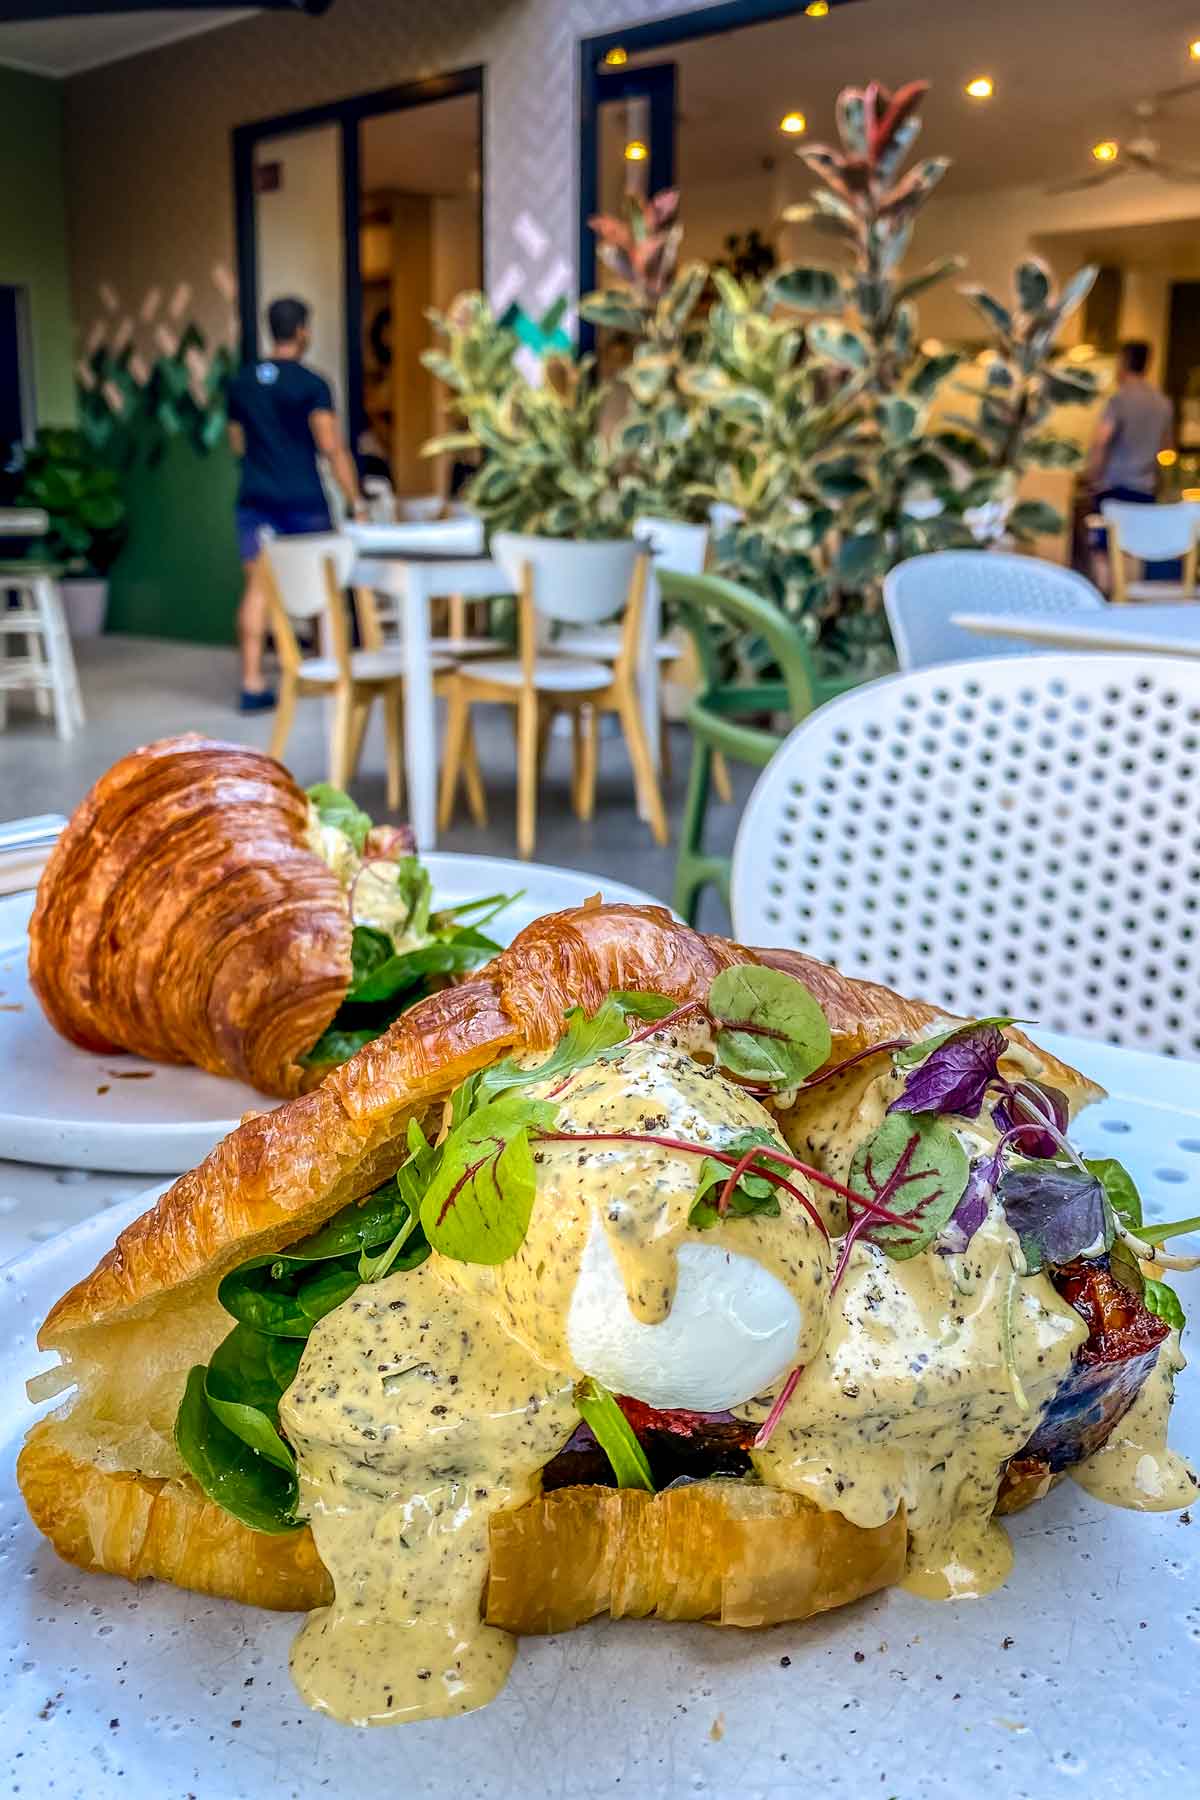 Feature photo - best cafes in Brisbane - eggs benedict on white table